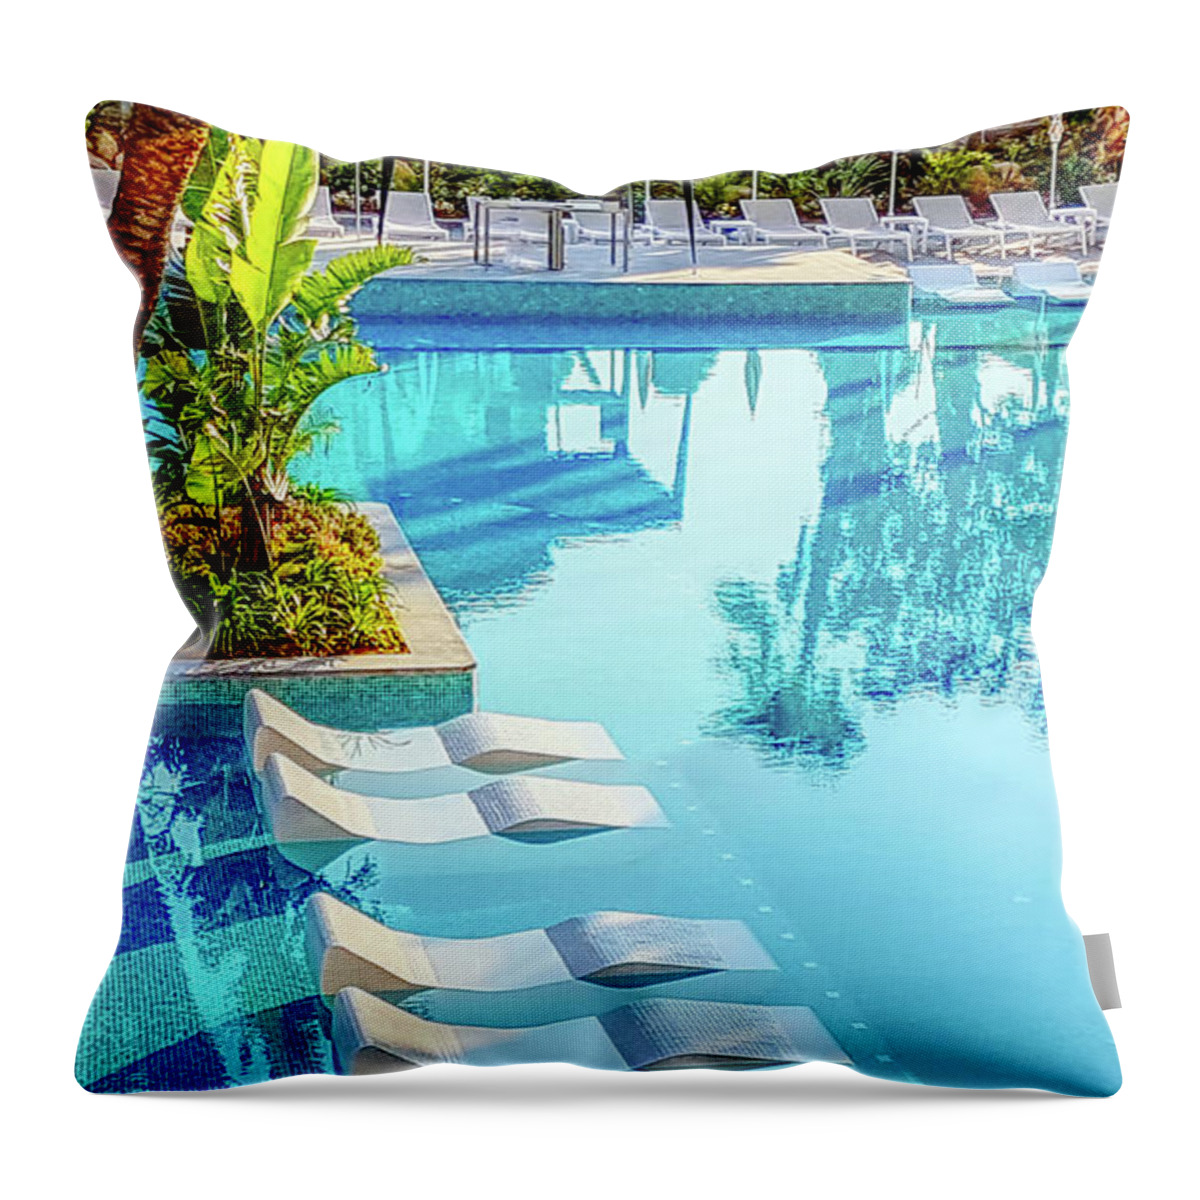 Holidays Throw Pillow featuring the photograph Happier days, holiday by the pool by Pics By Tony